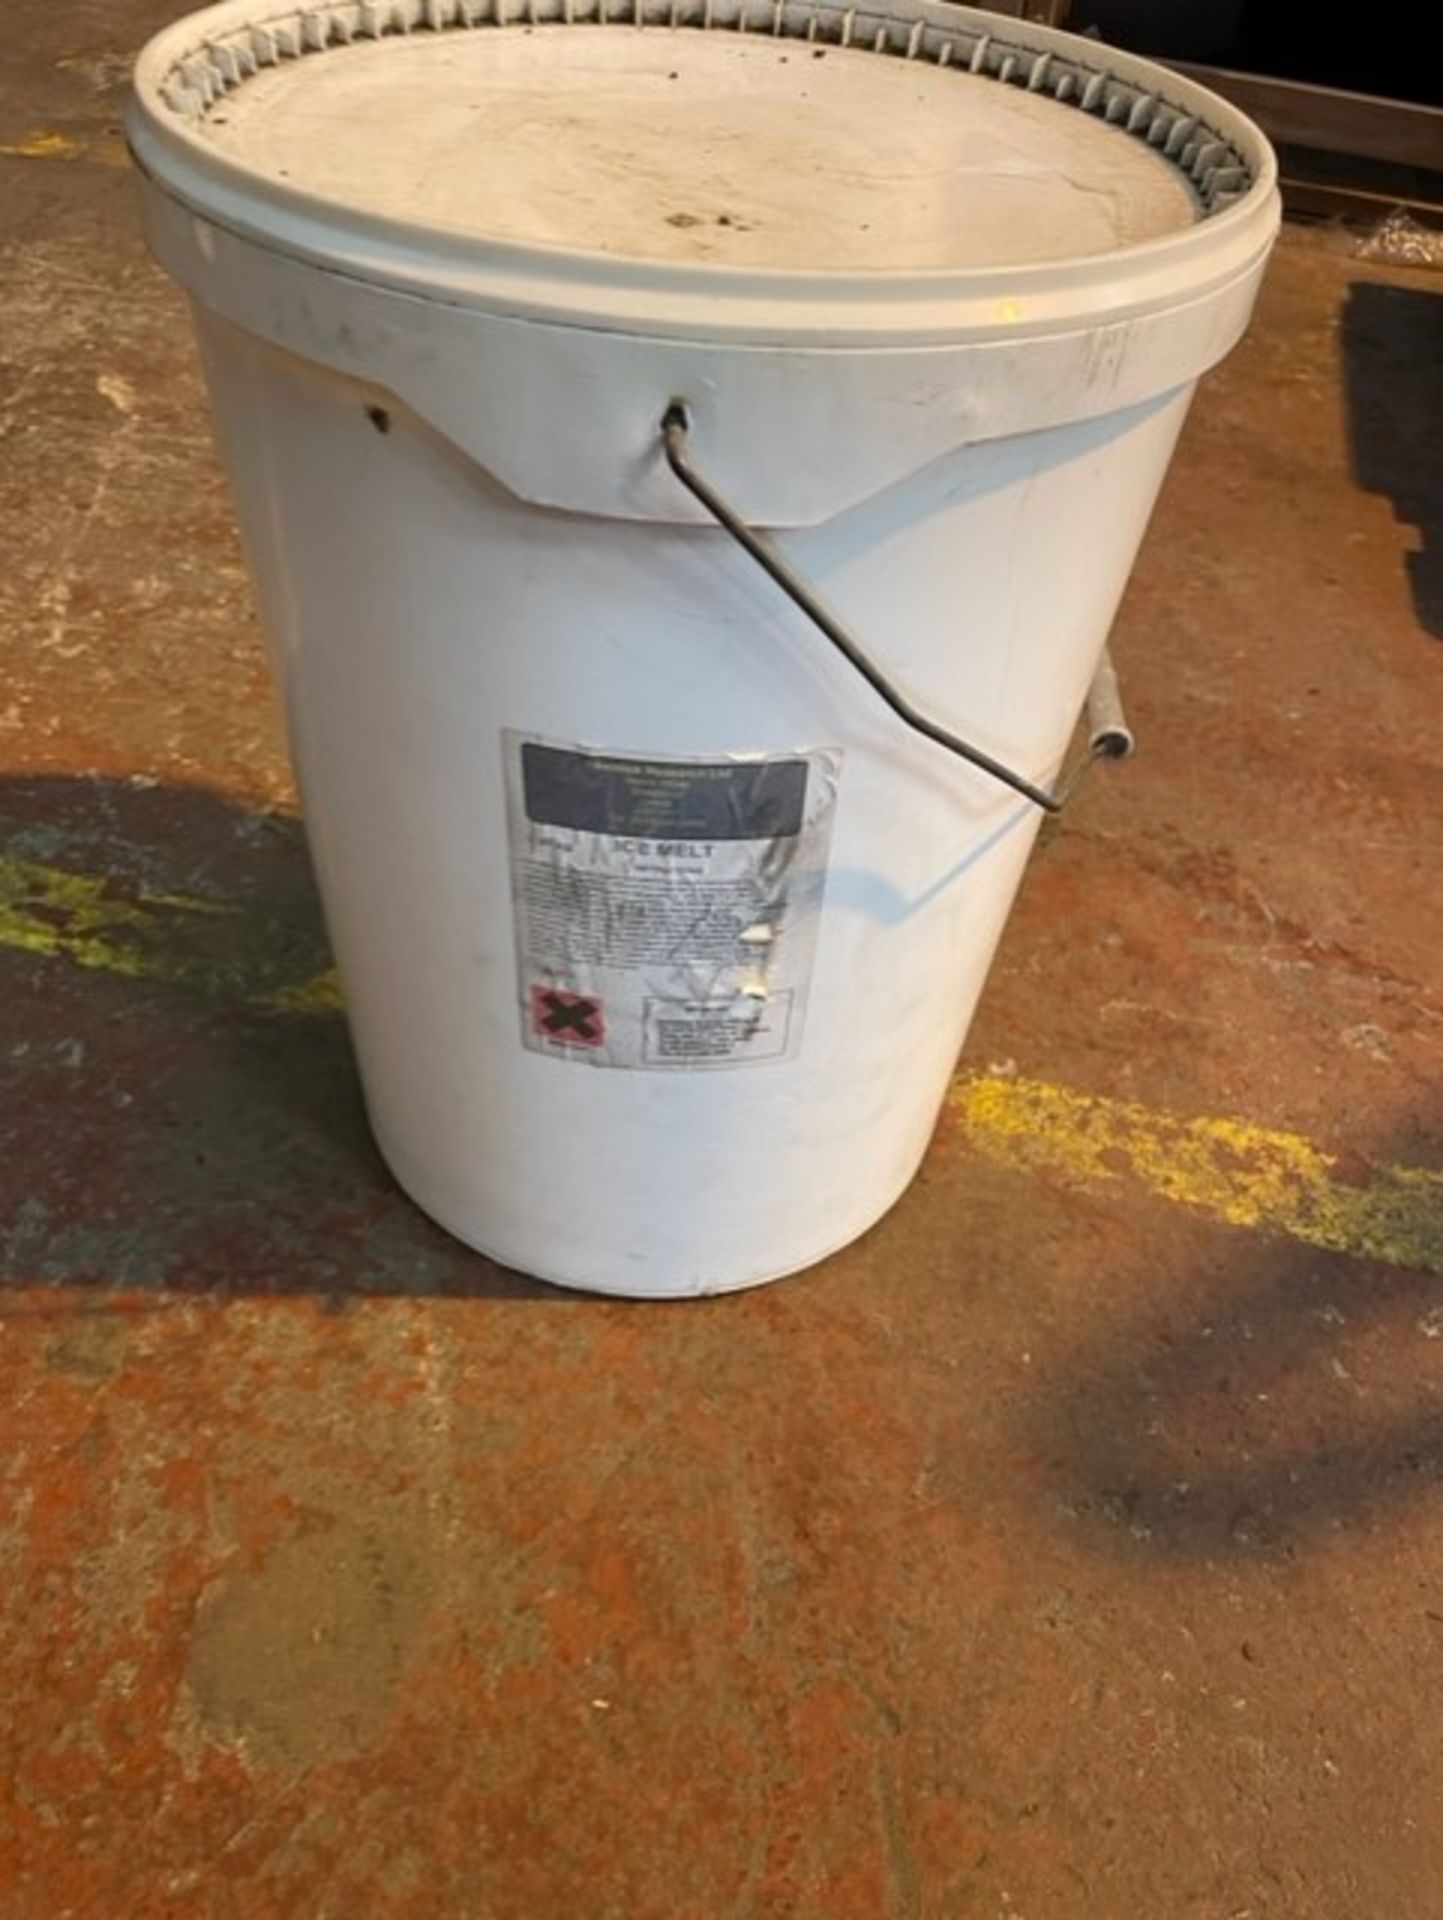 2 x 20kg buckets of ice melt chemical, expensive to buy